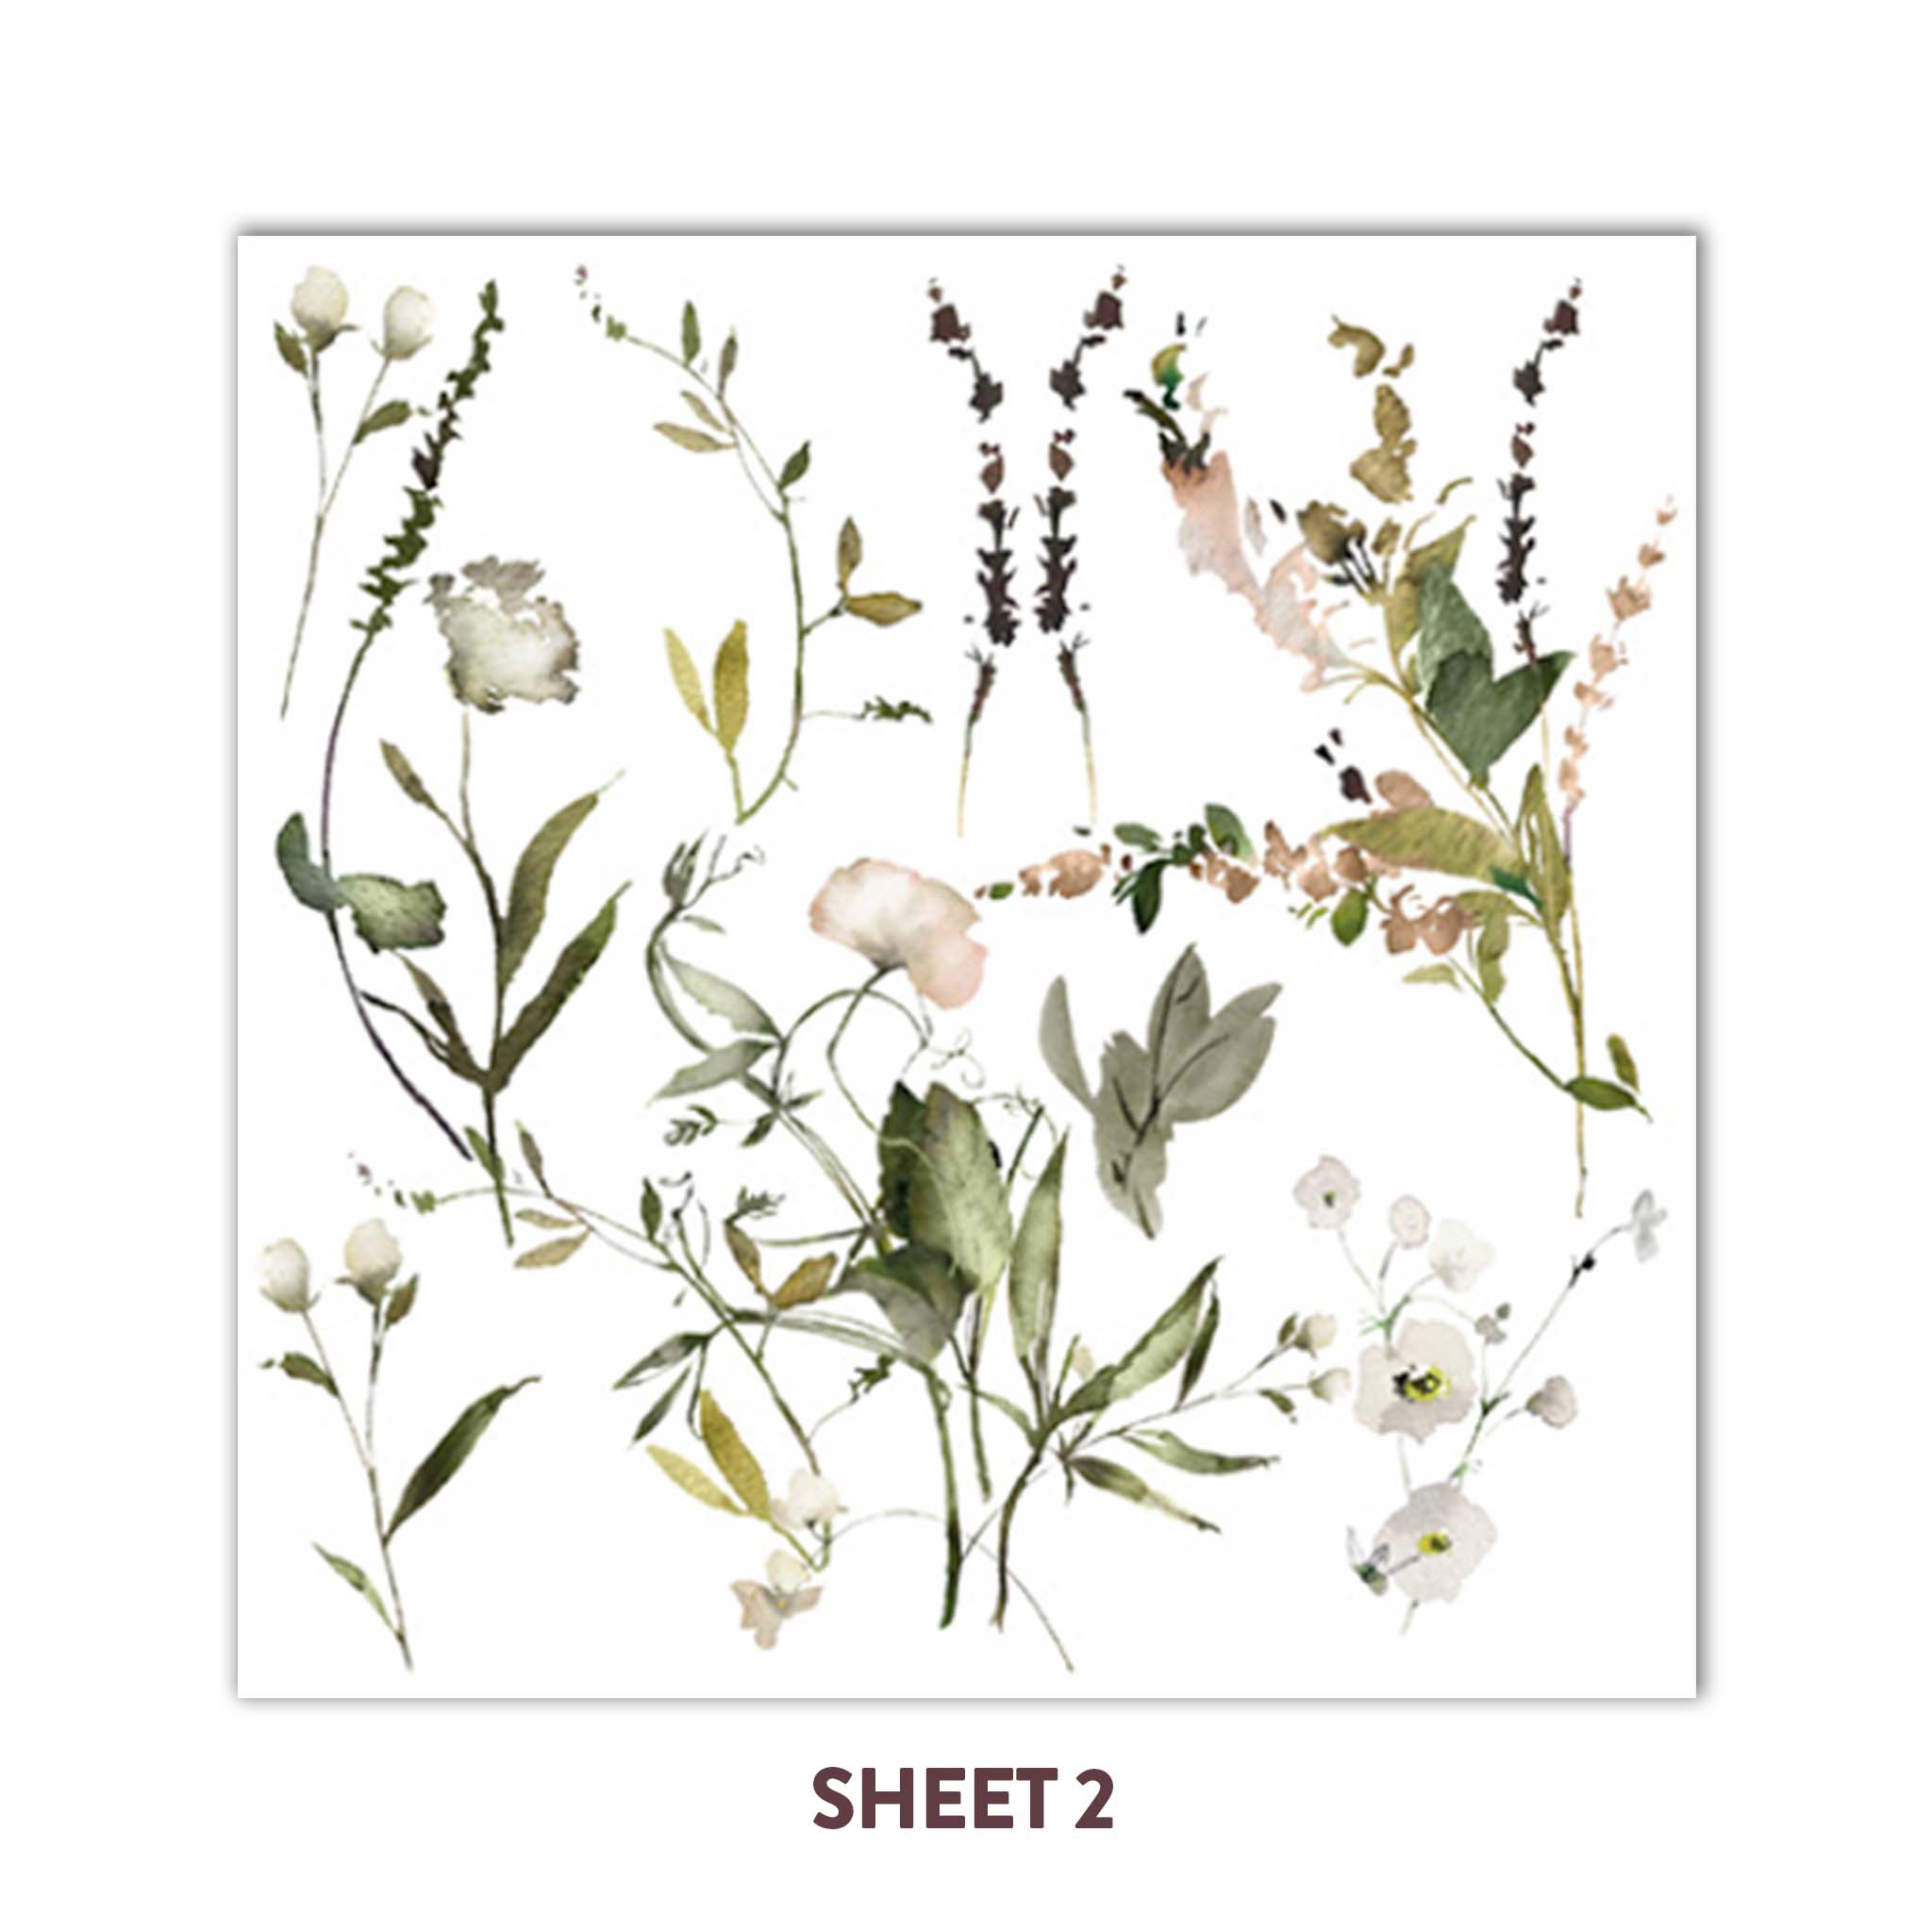 Sheet 2 of ReDesign with Prima's Pastels Artistry 12"x12" transfer is against a white background and features scattered cream colored flowers with foliage.